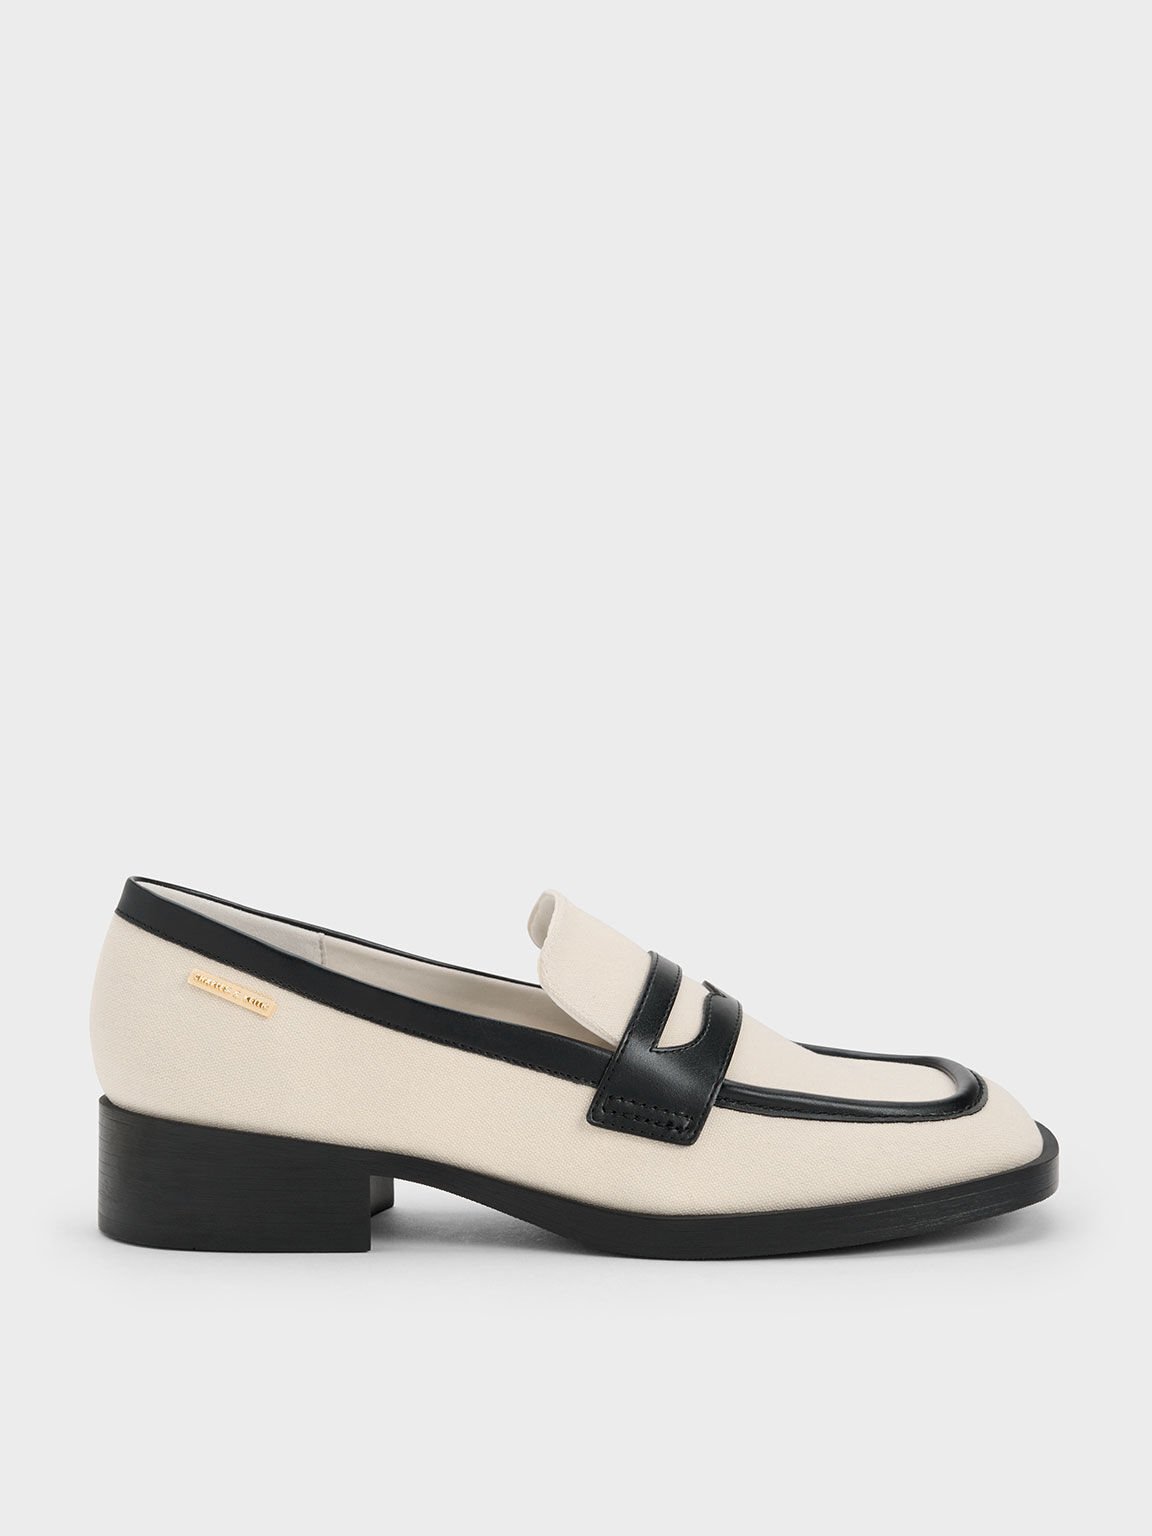 Canvas Cut-Out Penny Loafers, Black Satin, hi-res